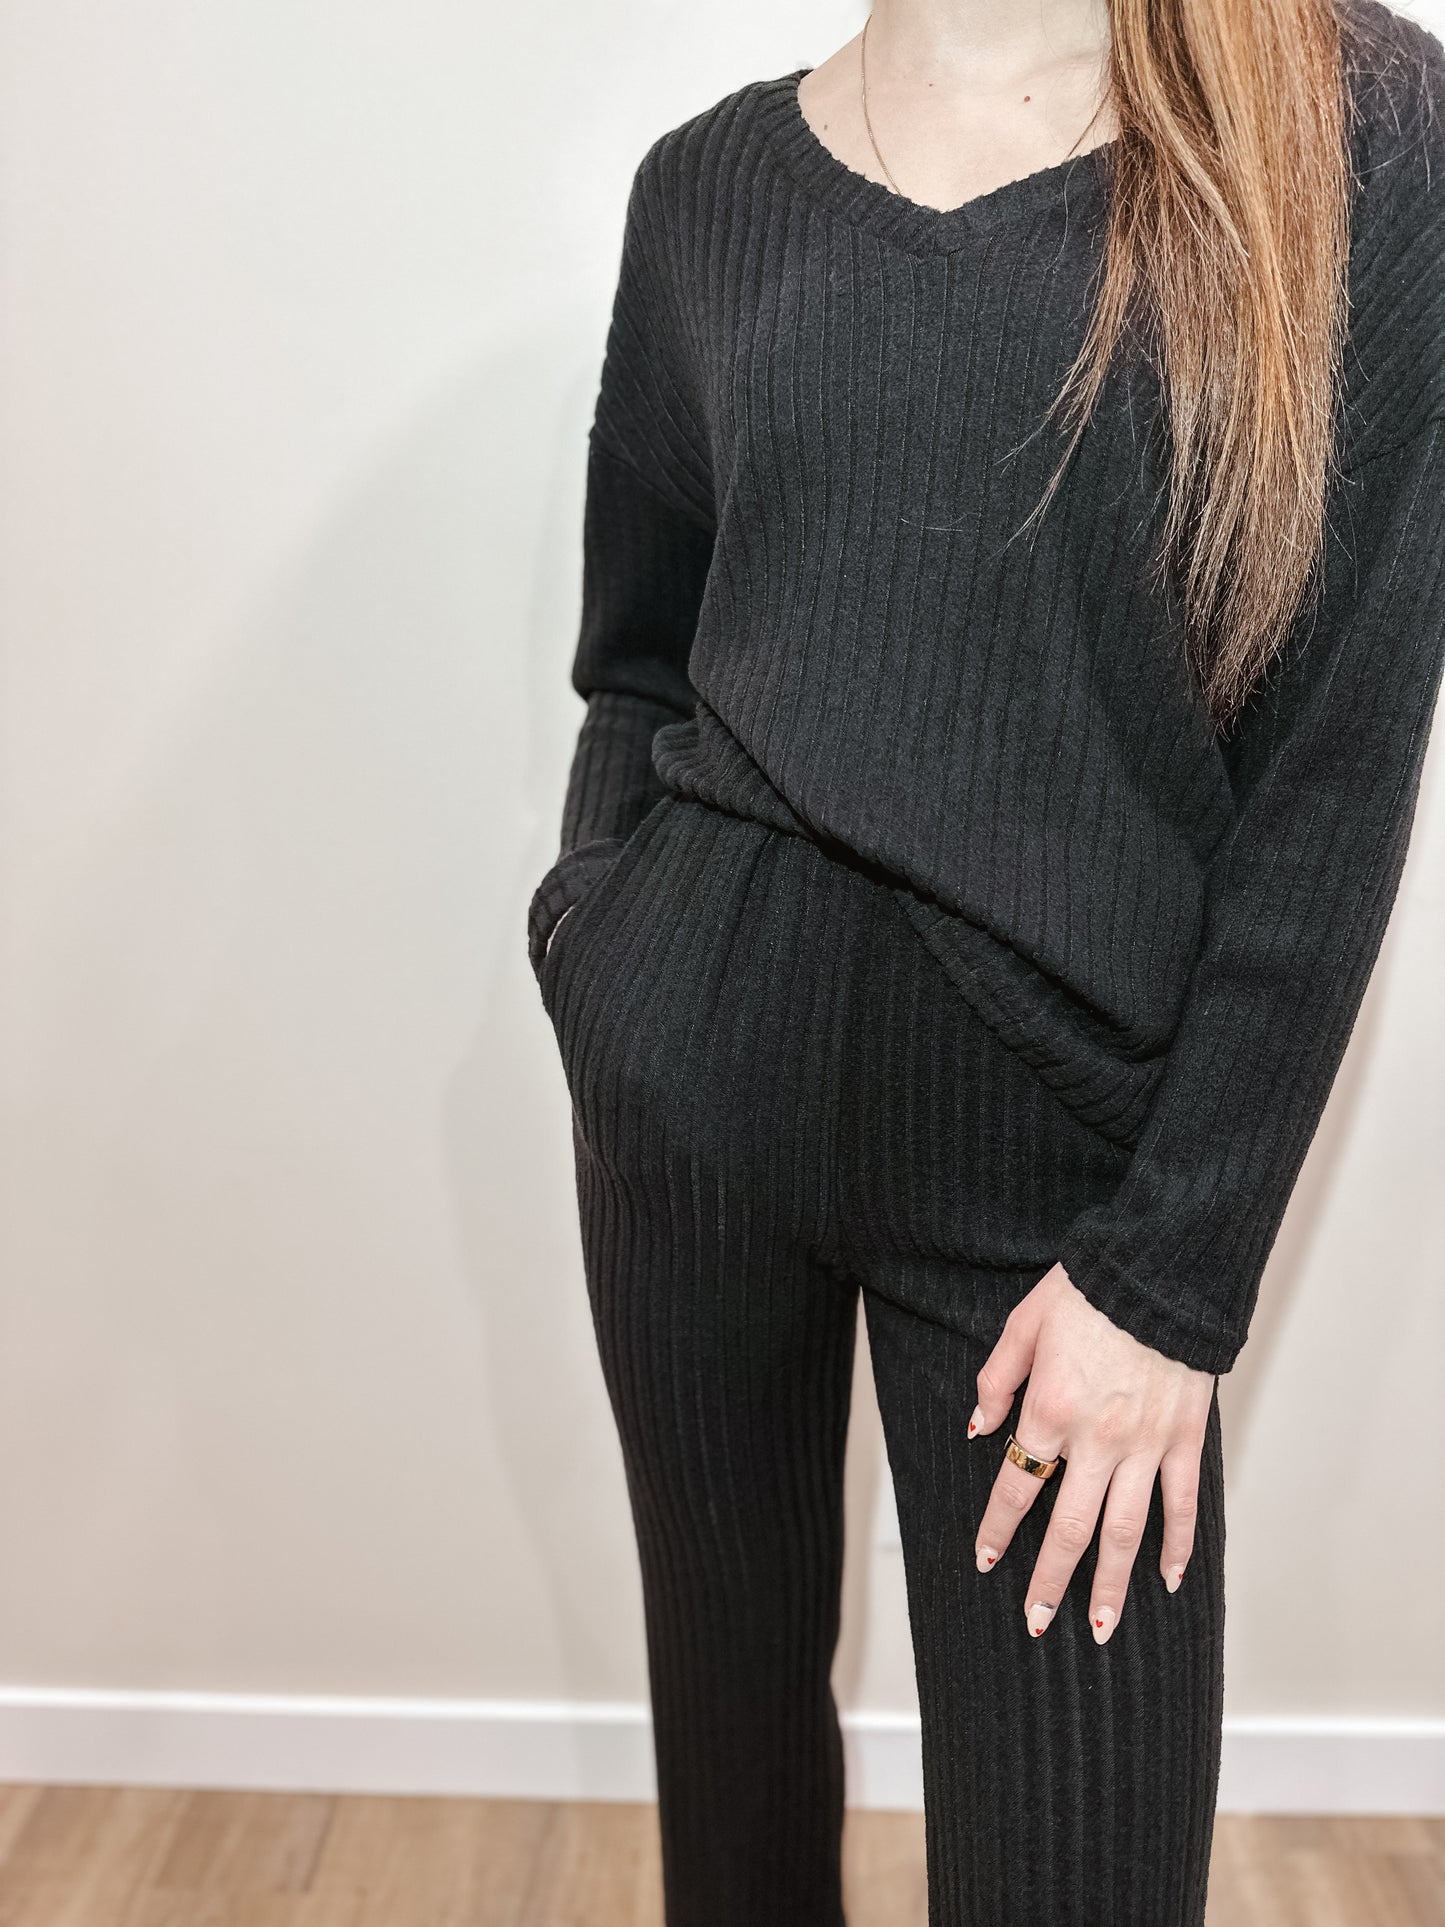 The Black Ribbed Lounge Top